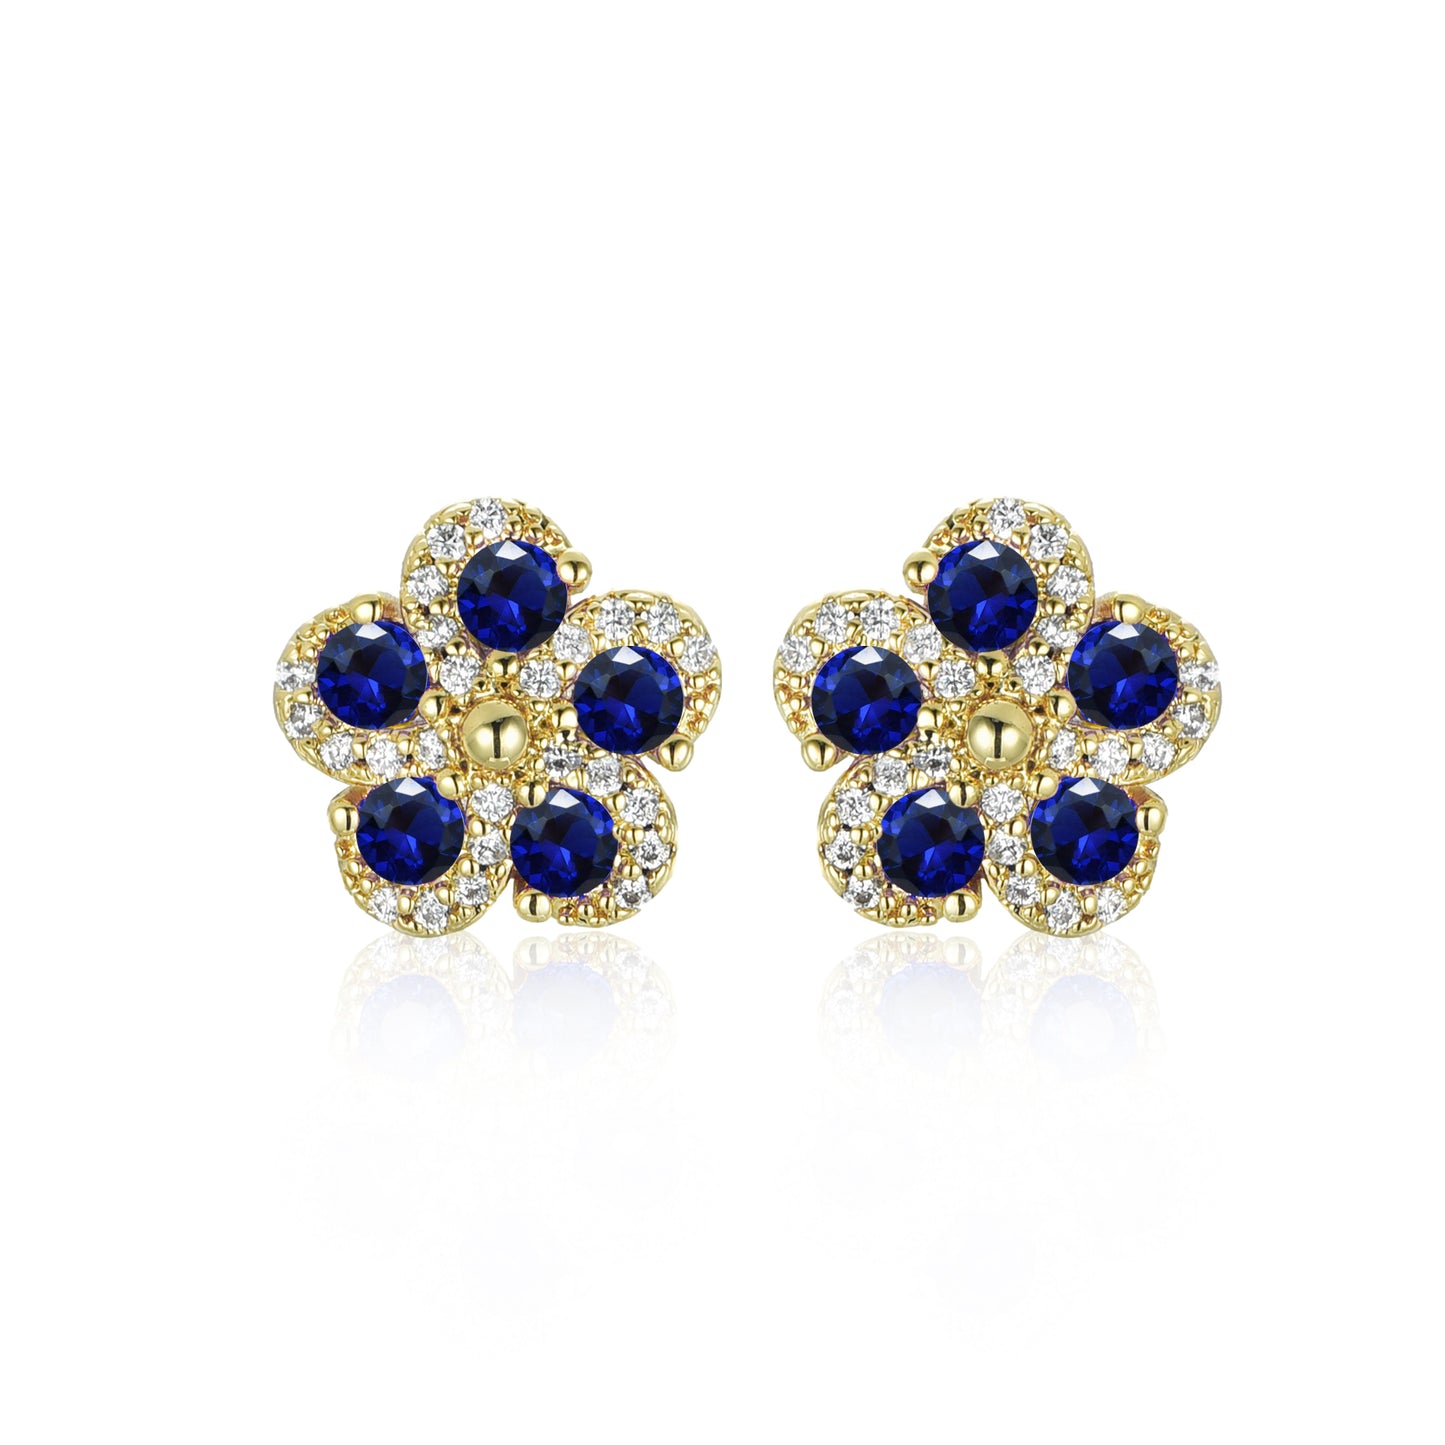 Gold Plated 10mm Surgical Steel 5 Petal Colorful CZ Flower Stud Earrings